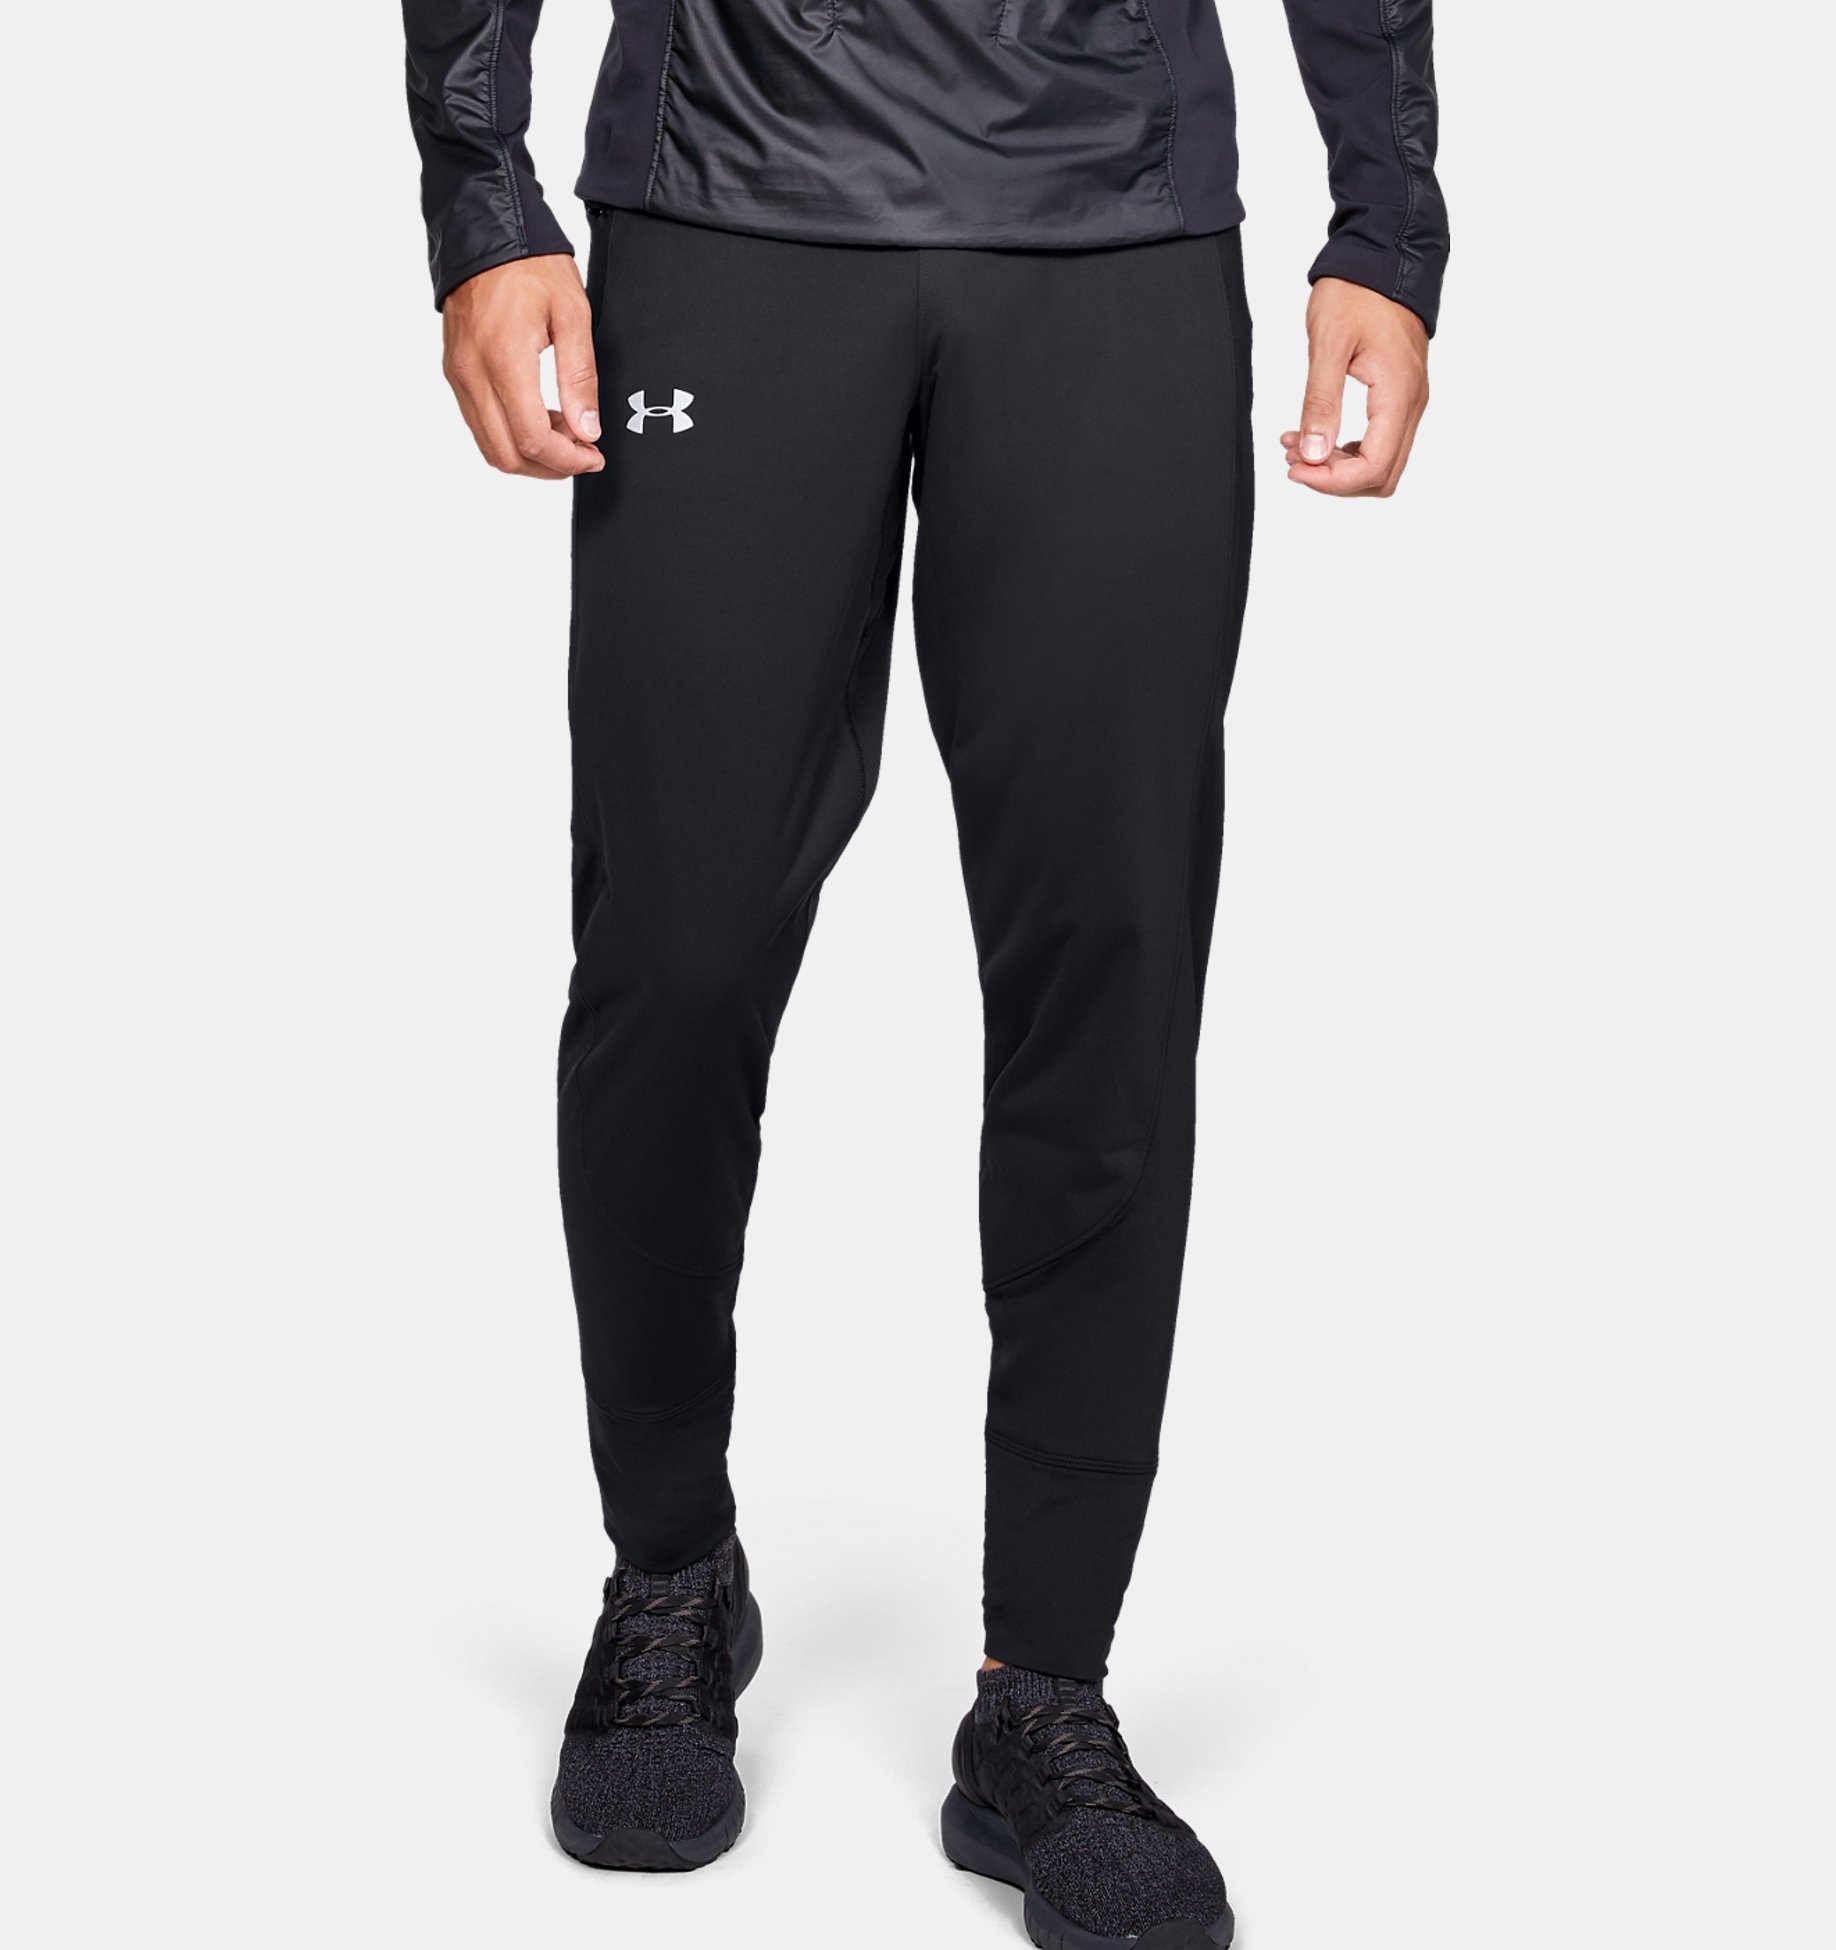 Black Under Armour ColdGear Tapered Mens Running Track Pants 